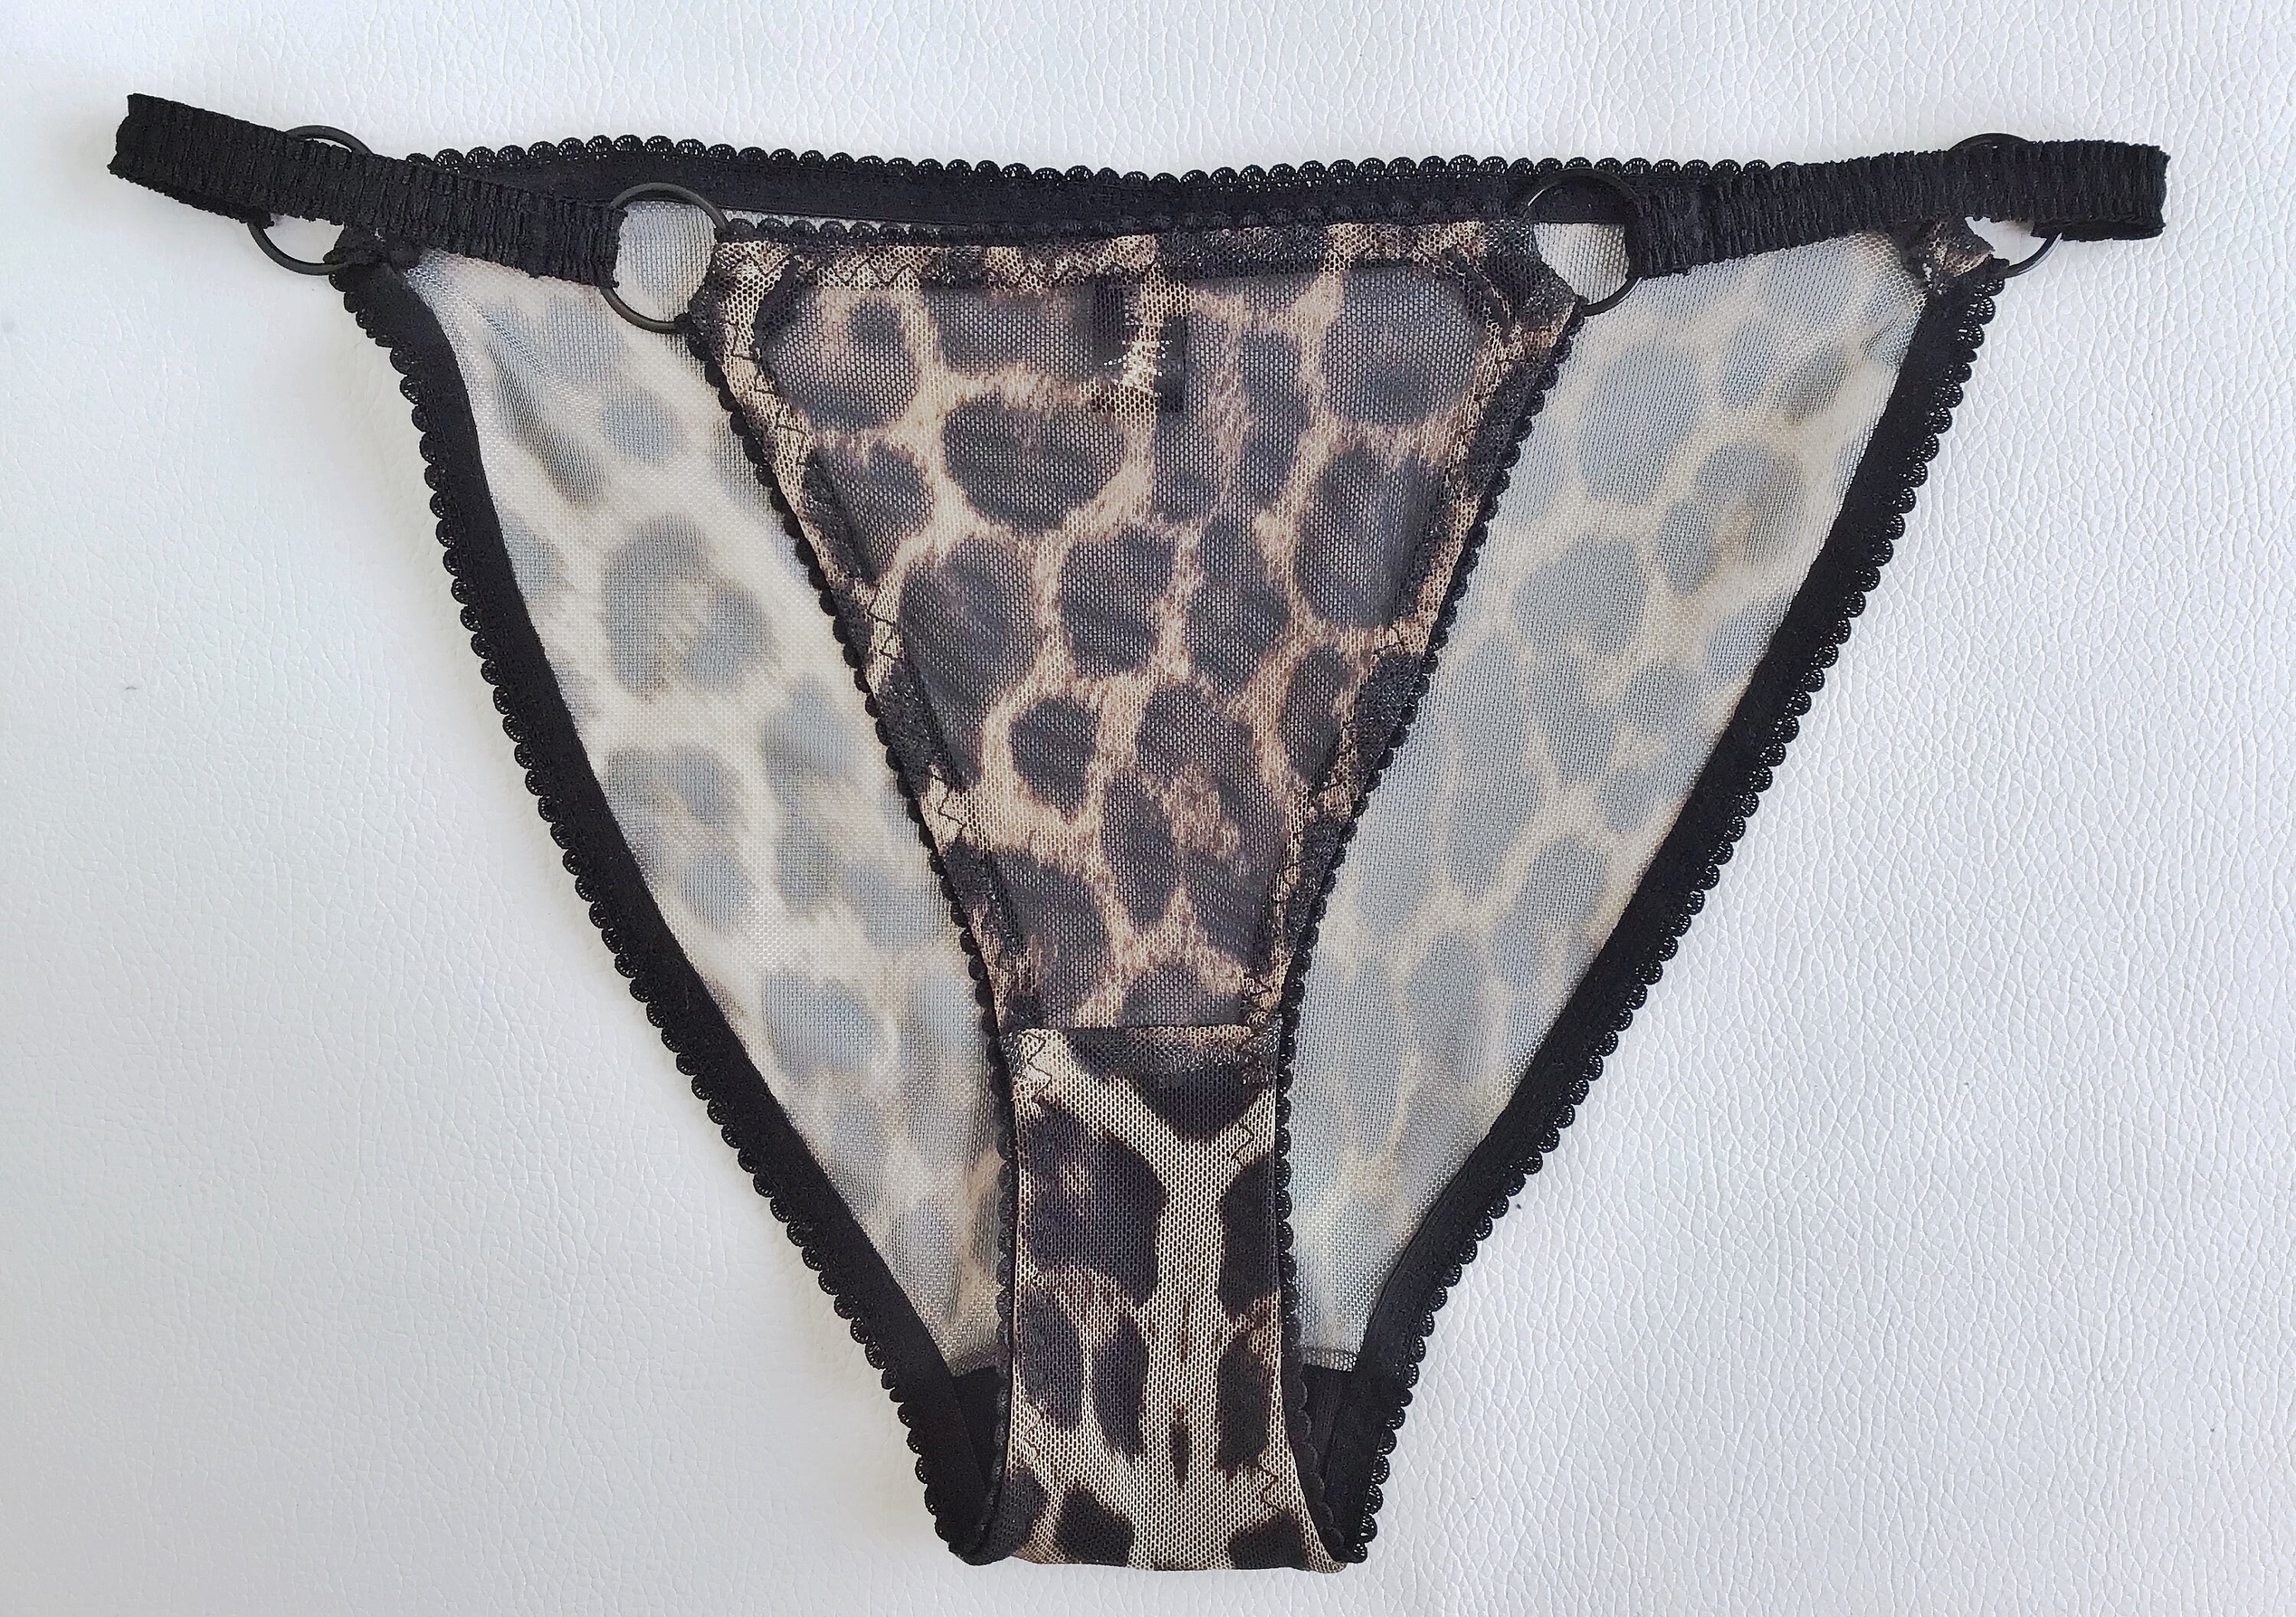 Leopard see thru LILITH mesh knickers. Sexy gift for wife, girlfriend. Erotic sheer panties. Handmade to order lingerie in your size photo